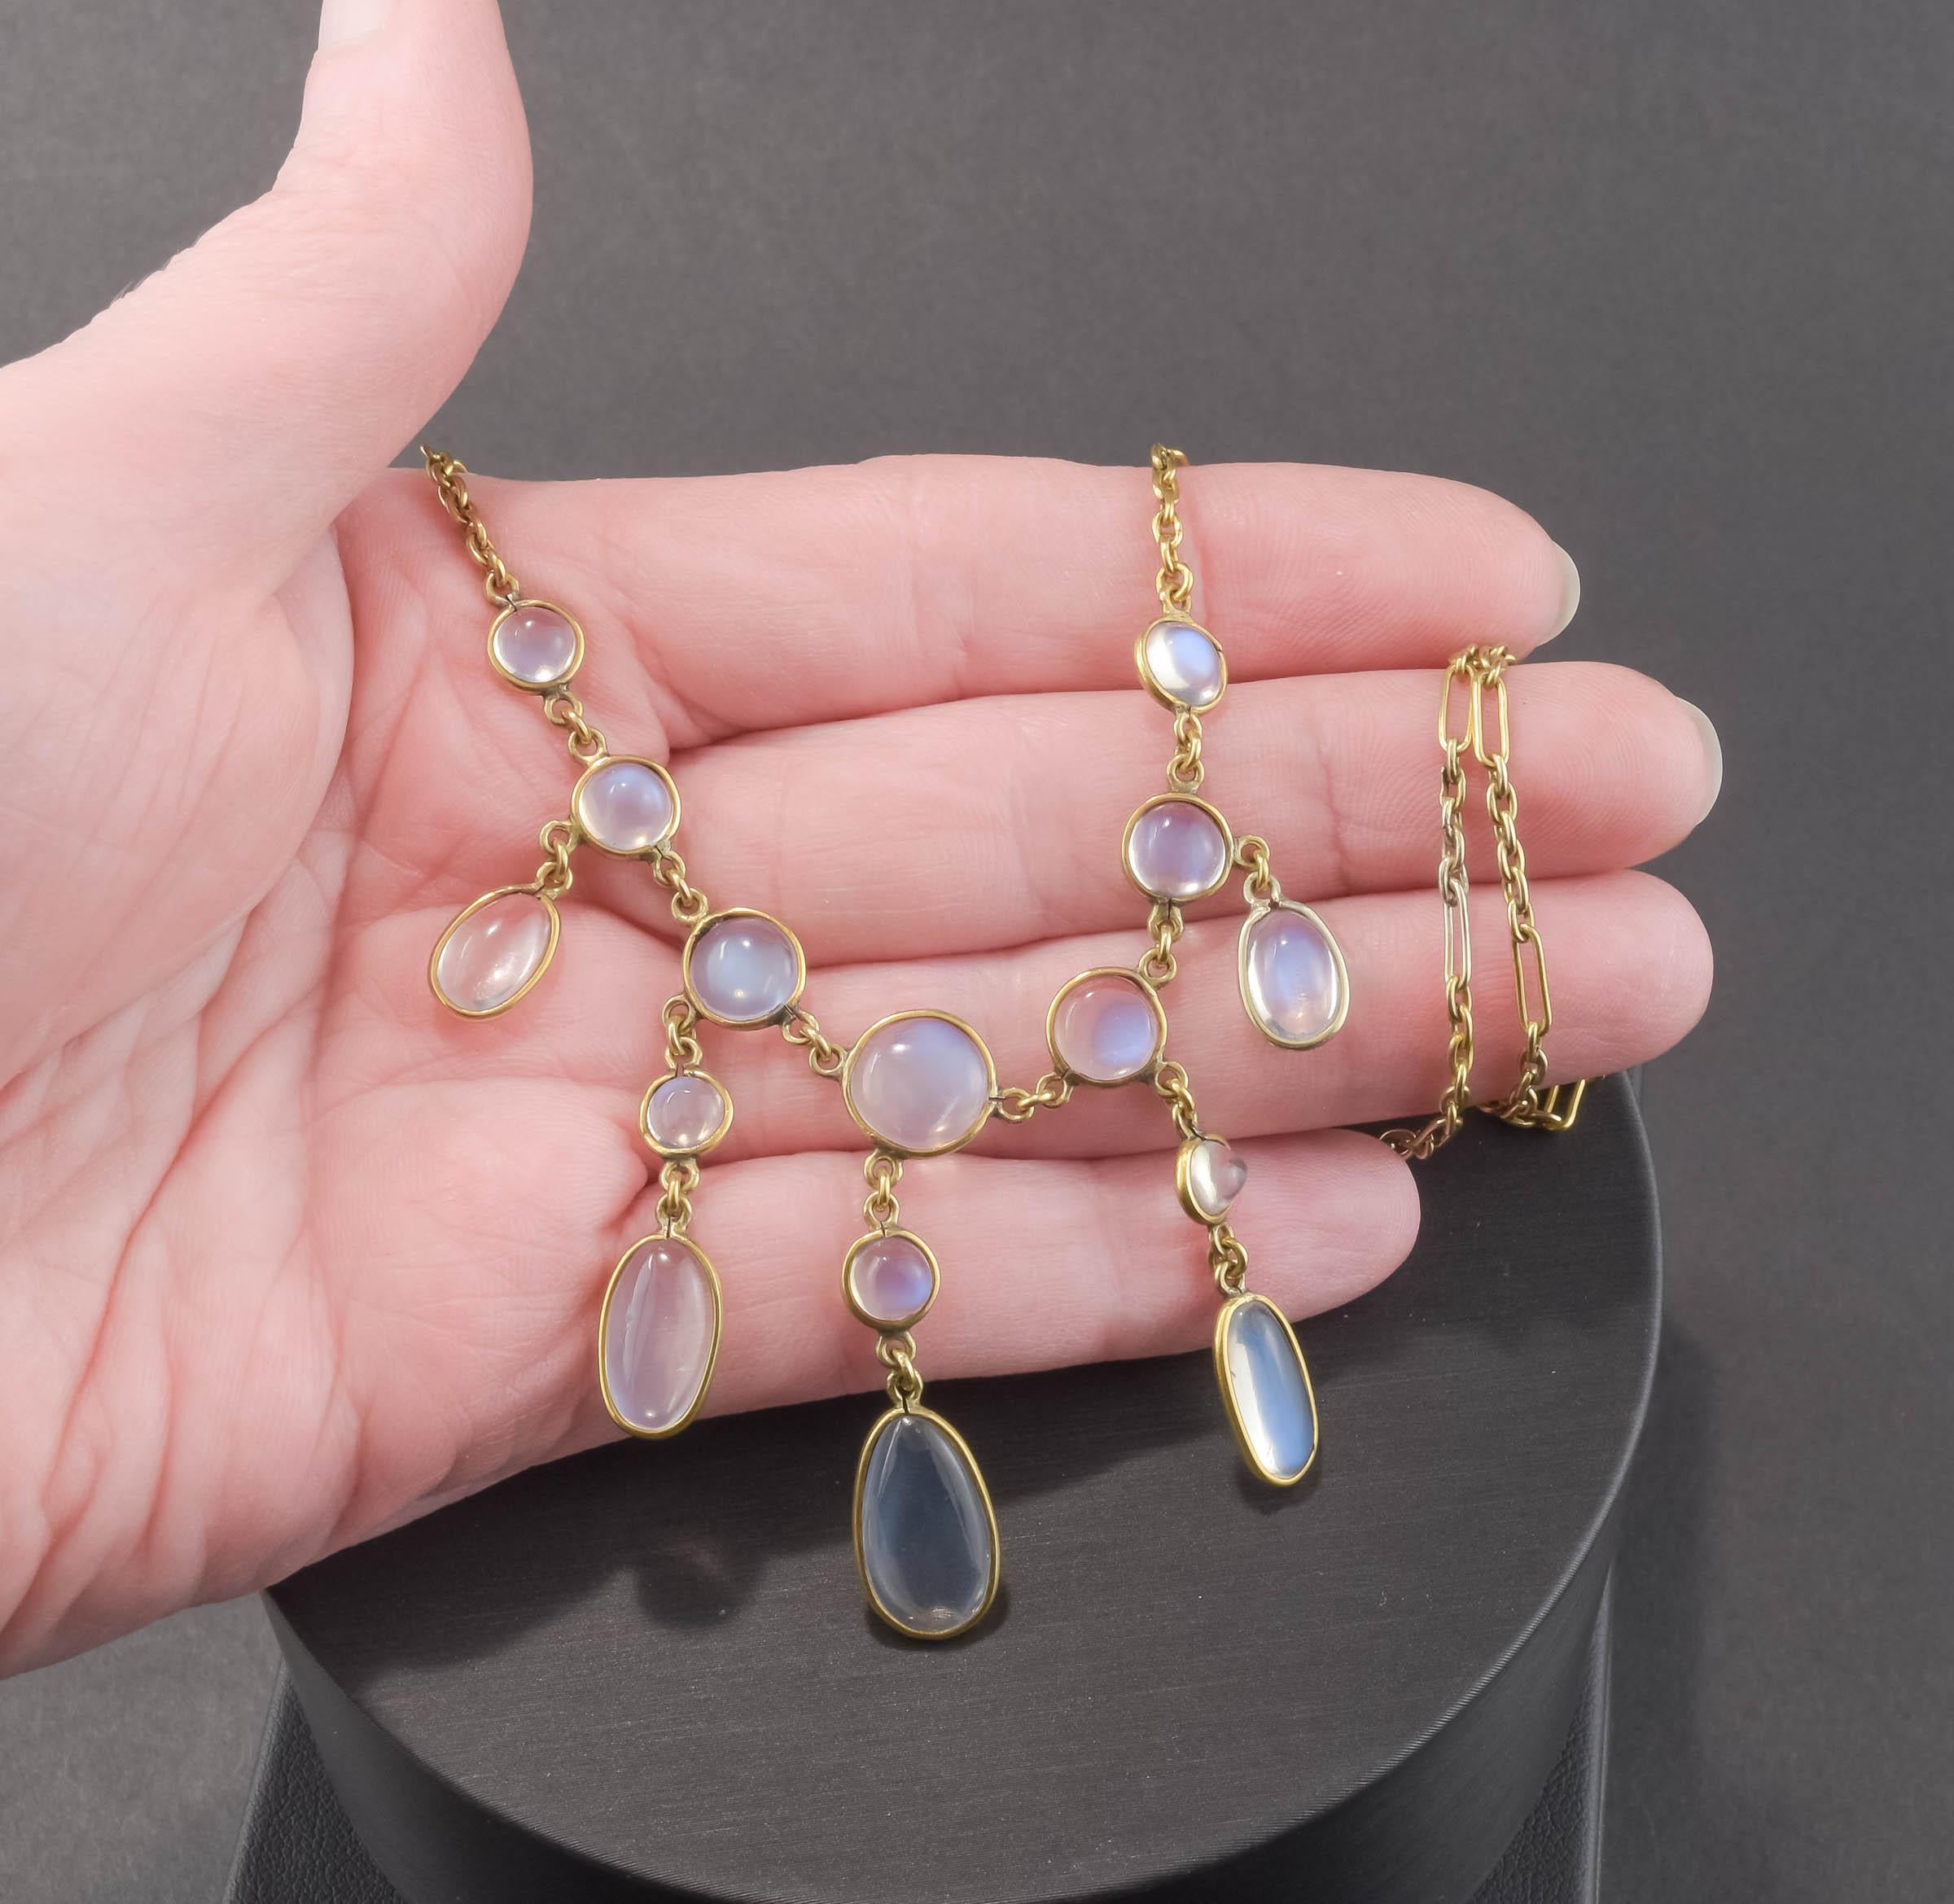 Women's Antique 15K Gold Moonstone Drop Necklace with Fancy Link Chain